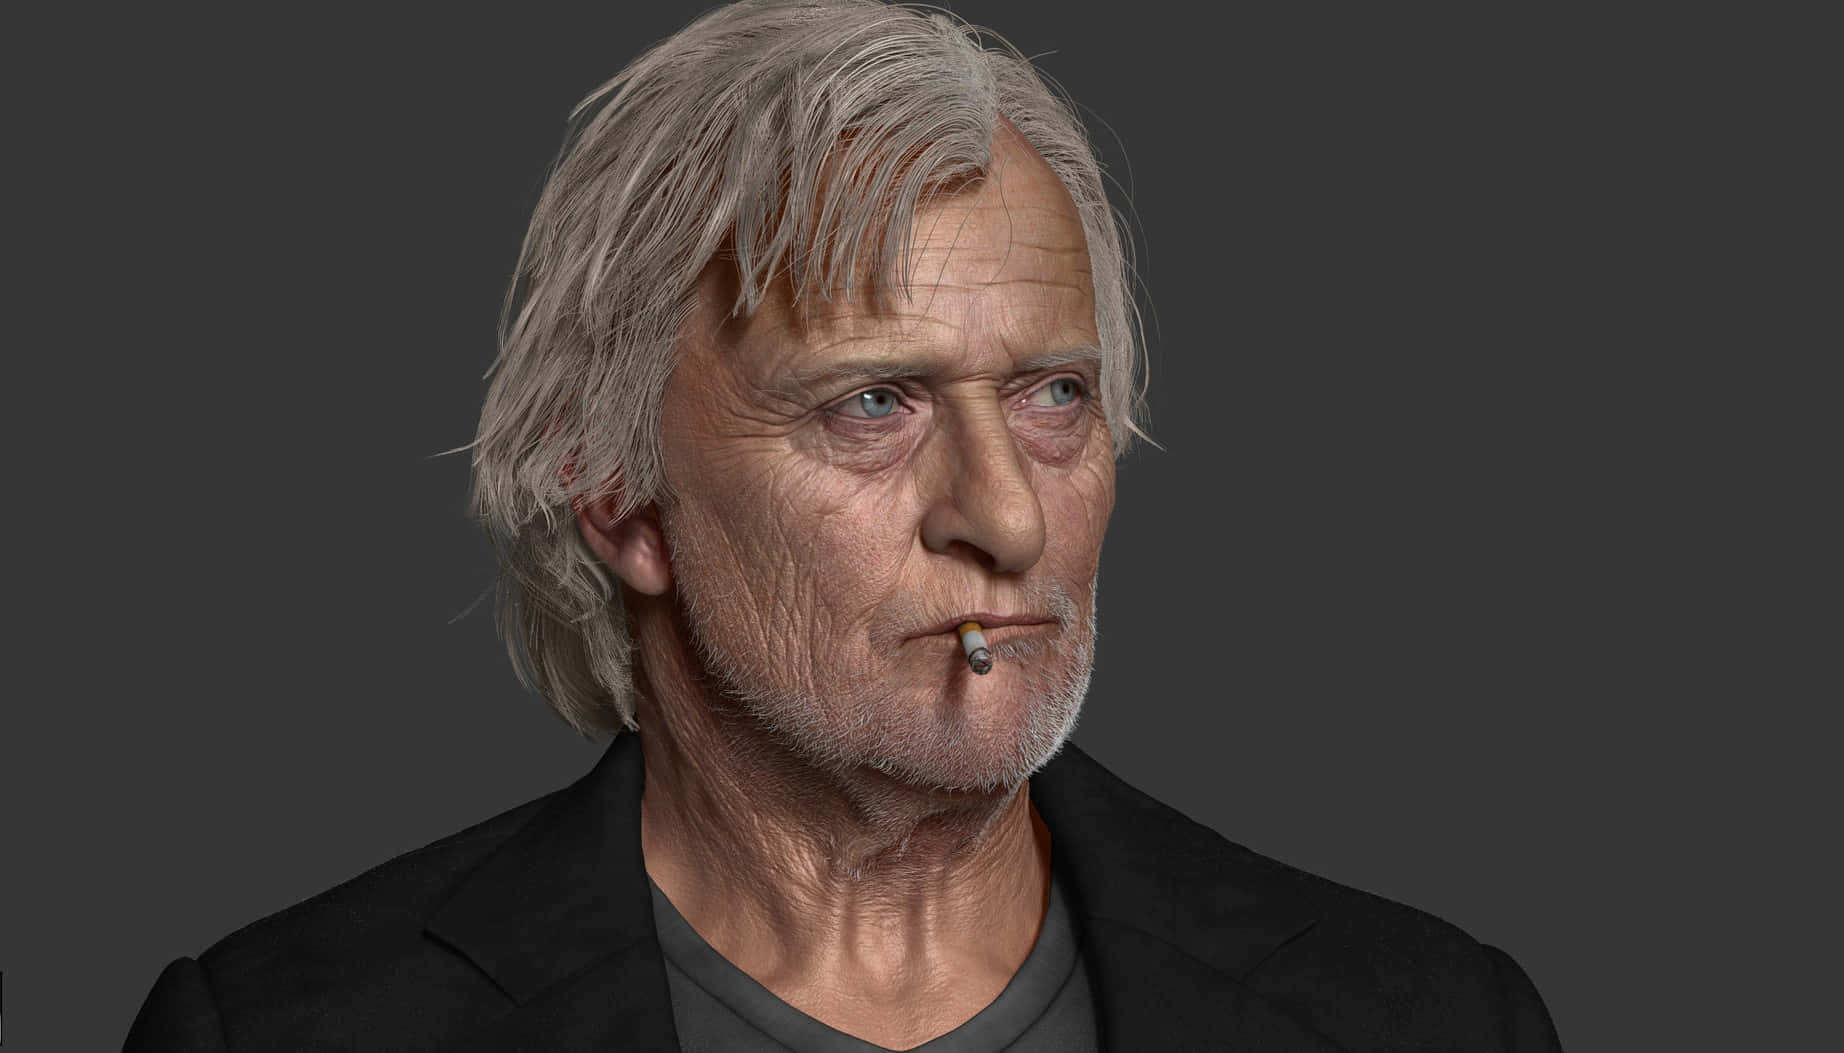 Rutgerhauer Is Not A Sentence, It Is A Proper Name. Can You Please Provide A Complete Sentence Or Context In Which I Can Assist You With The Translation? Fondo de pantalla